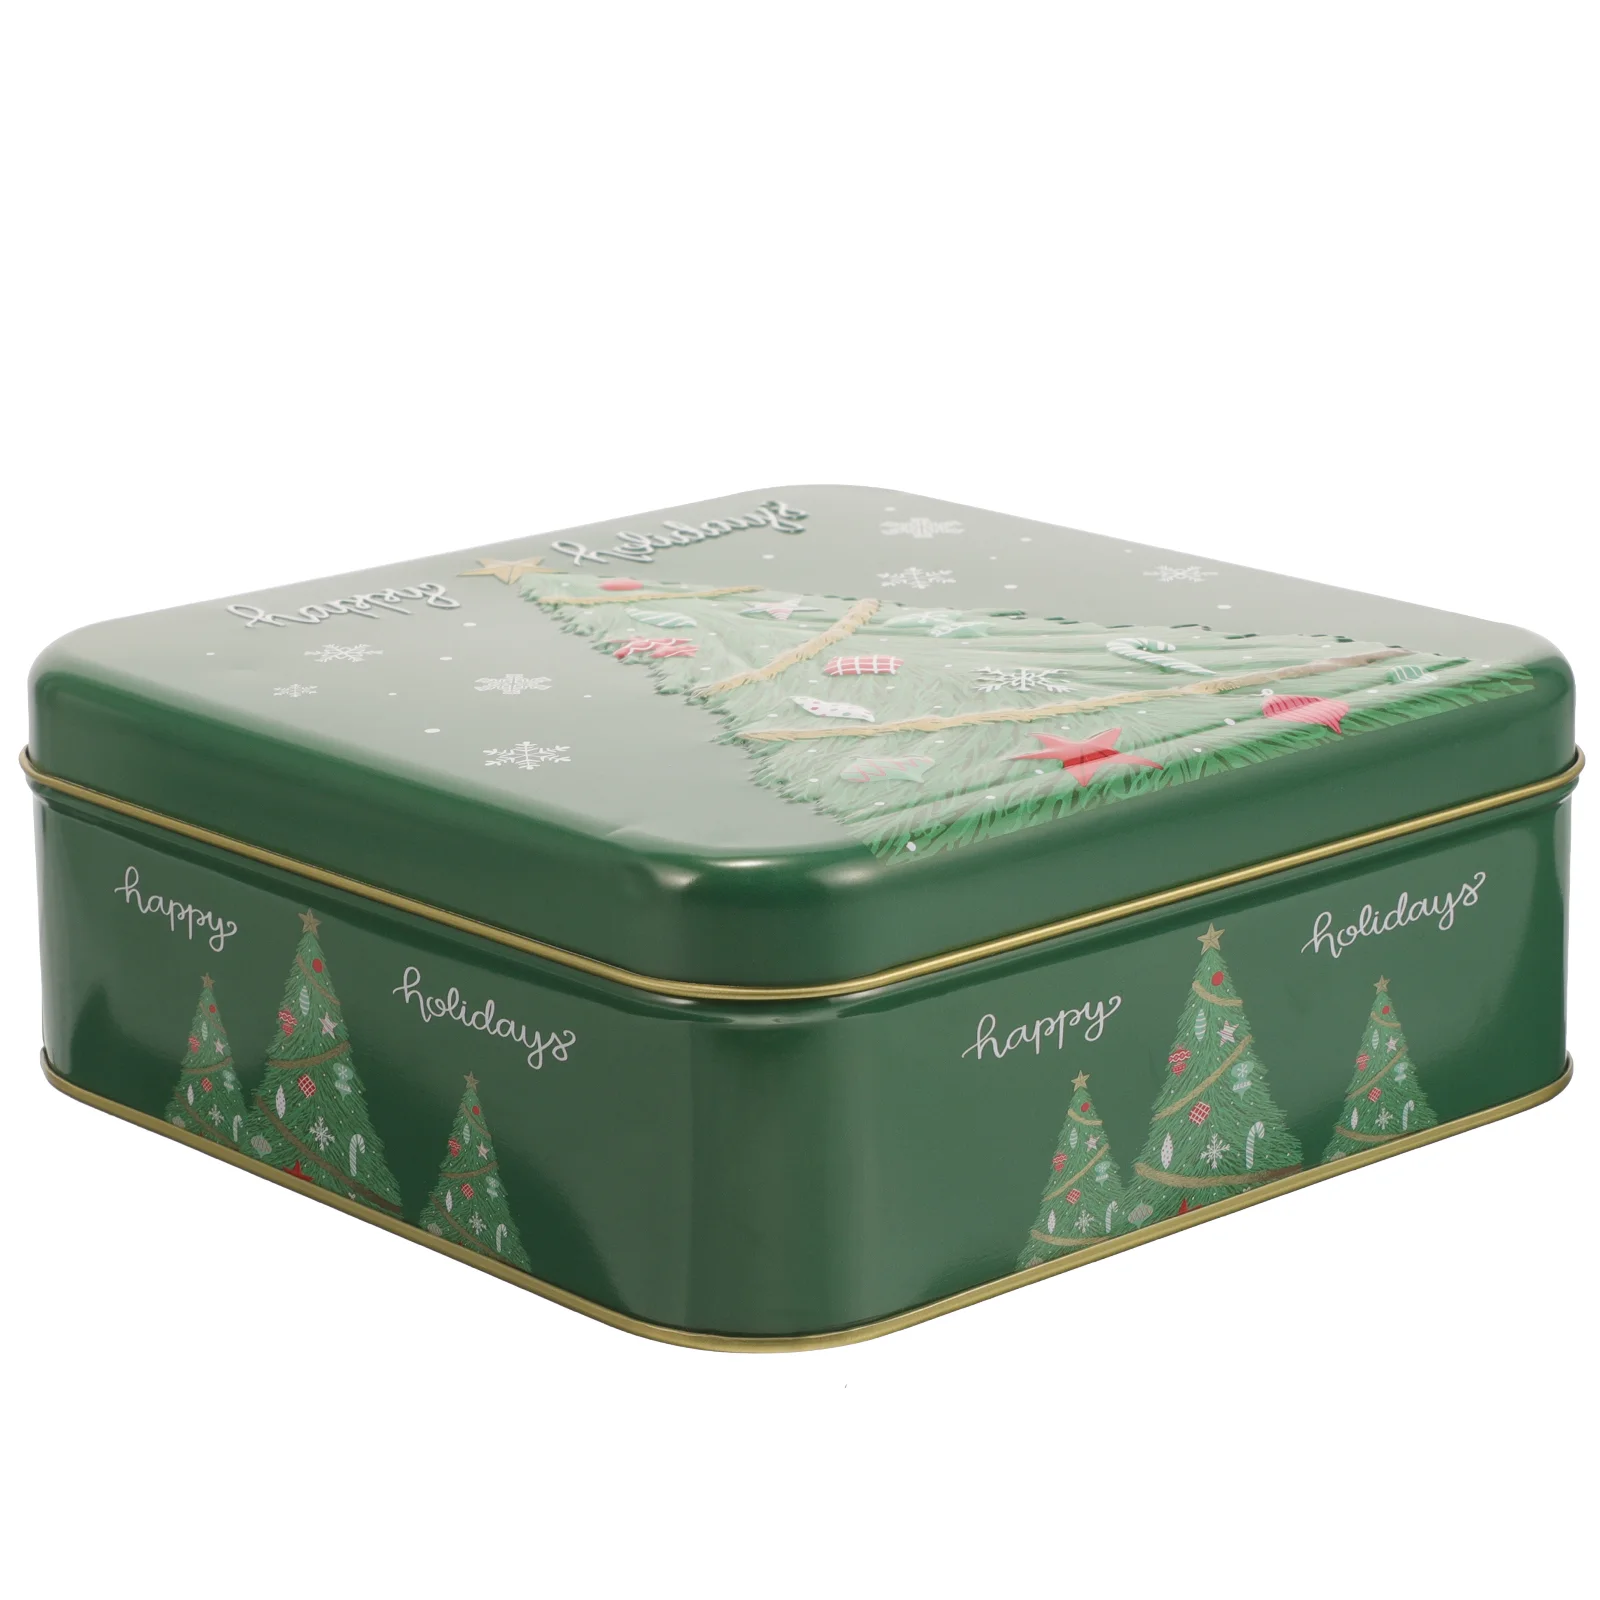 

Christmas Cookie Tins Santa Claus Tin Box Xmas Candy Tin Trick Or Treat Box Holiday Snack Jar Biscuits Container Christmas Favor